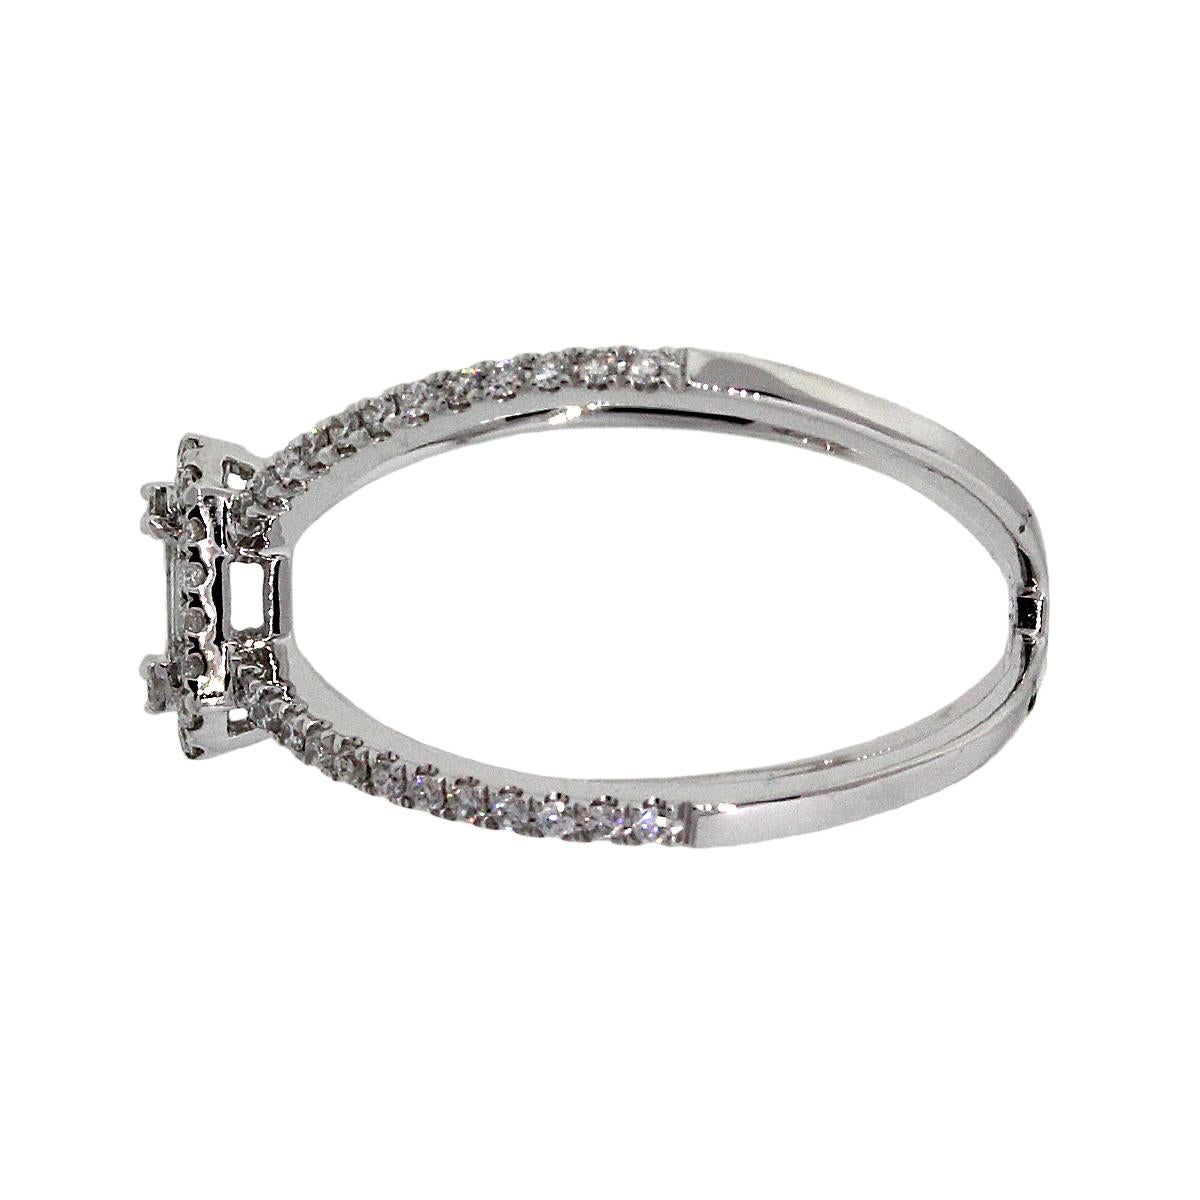 Material: 18k White gold
Diamond Details: Approximately 0.24ctw round brilliant cut diamonds. Diamonds are G/H in color and VS in clarity.
Baguette Diamond Details: Approximately 0.12ctw Baguette cut diamonds. Diamonds are G/H in color and VS in